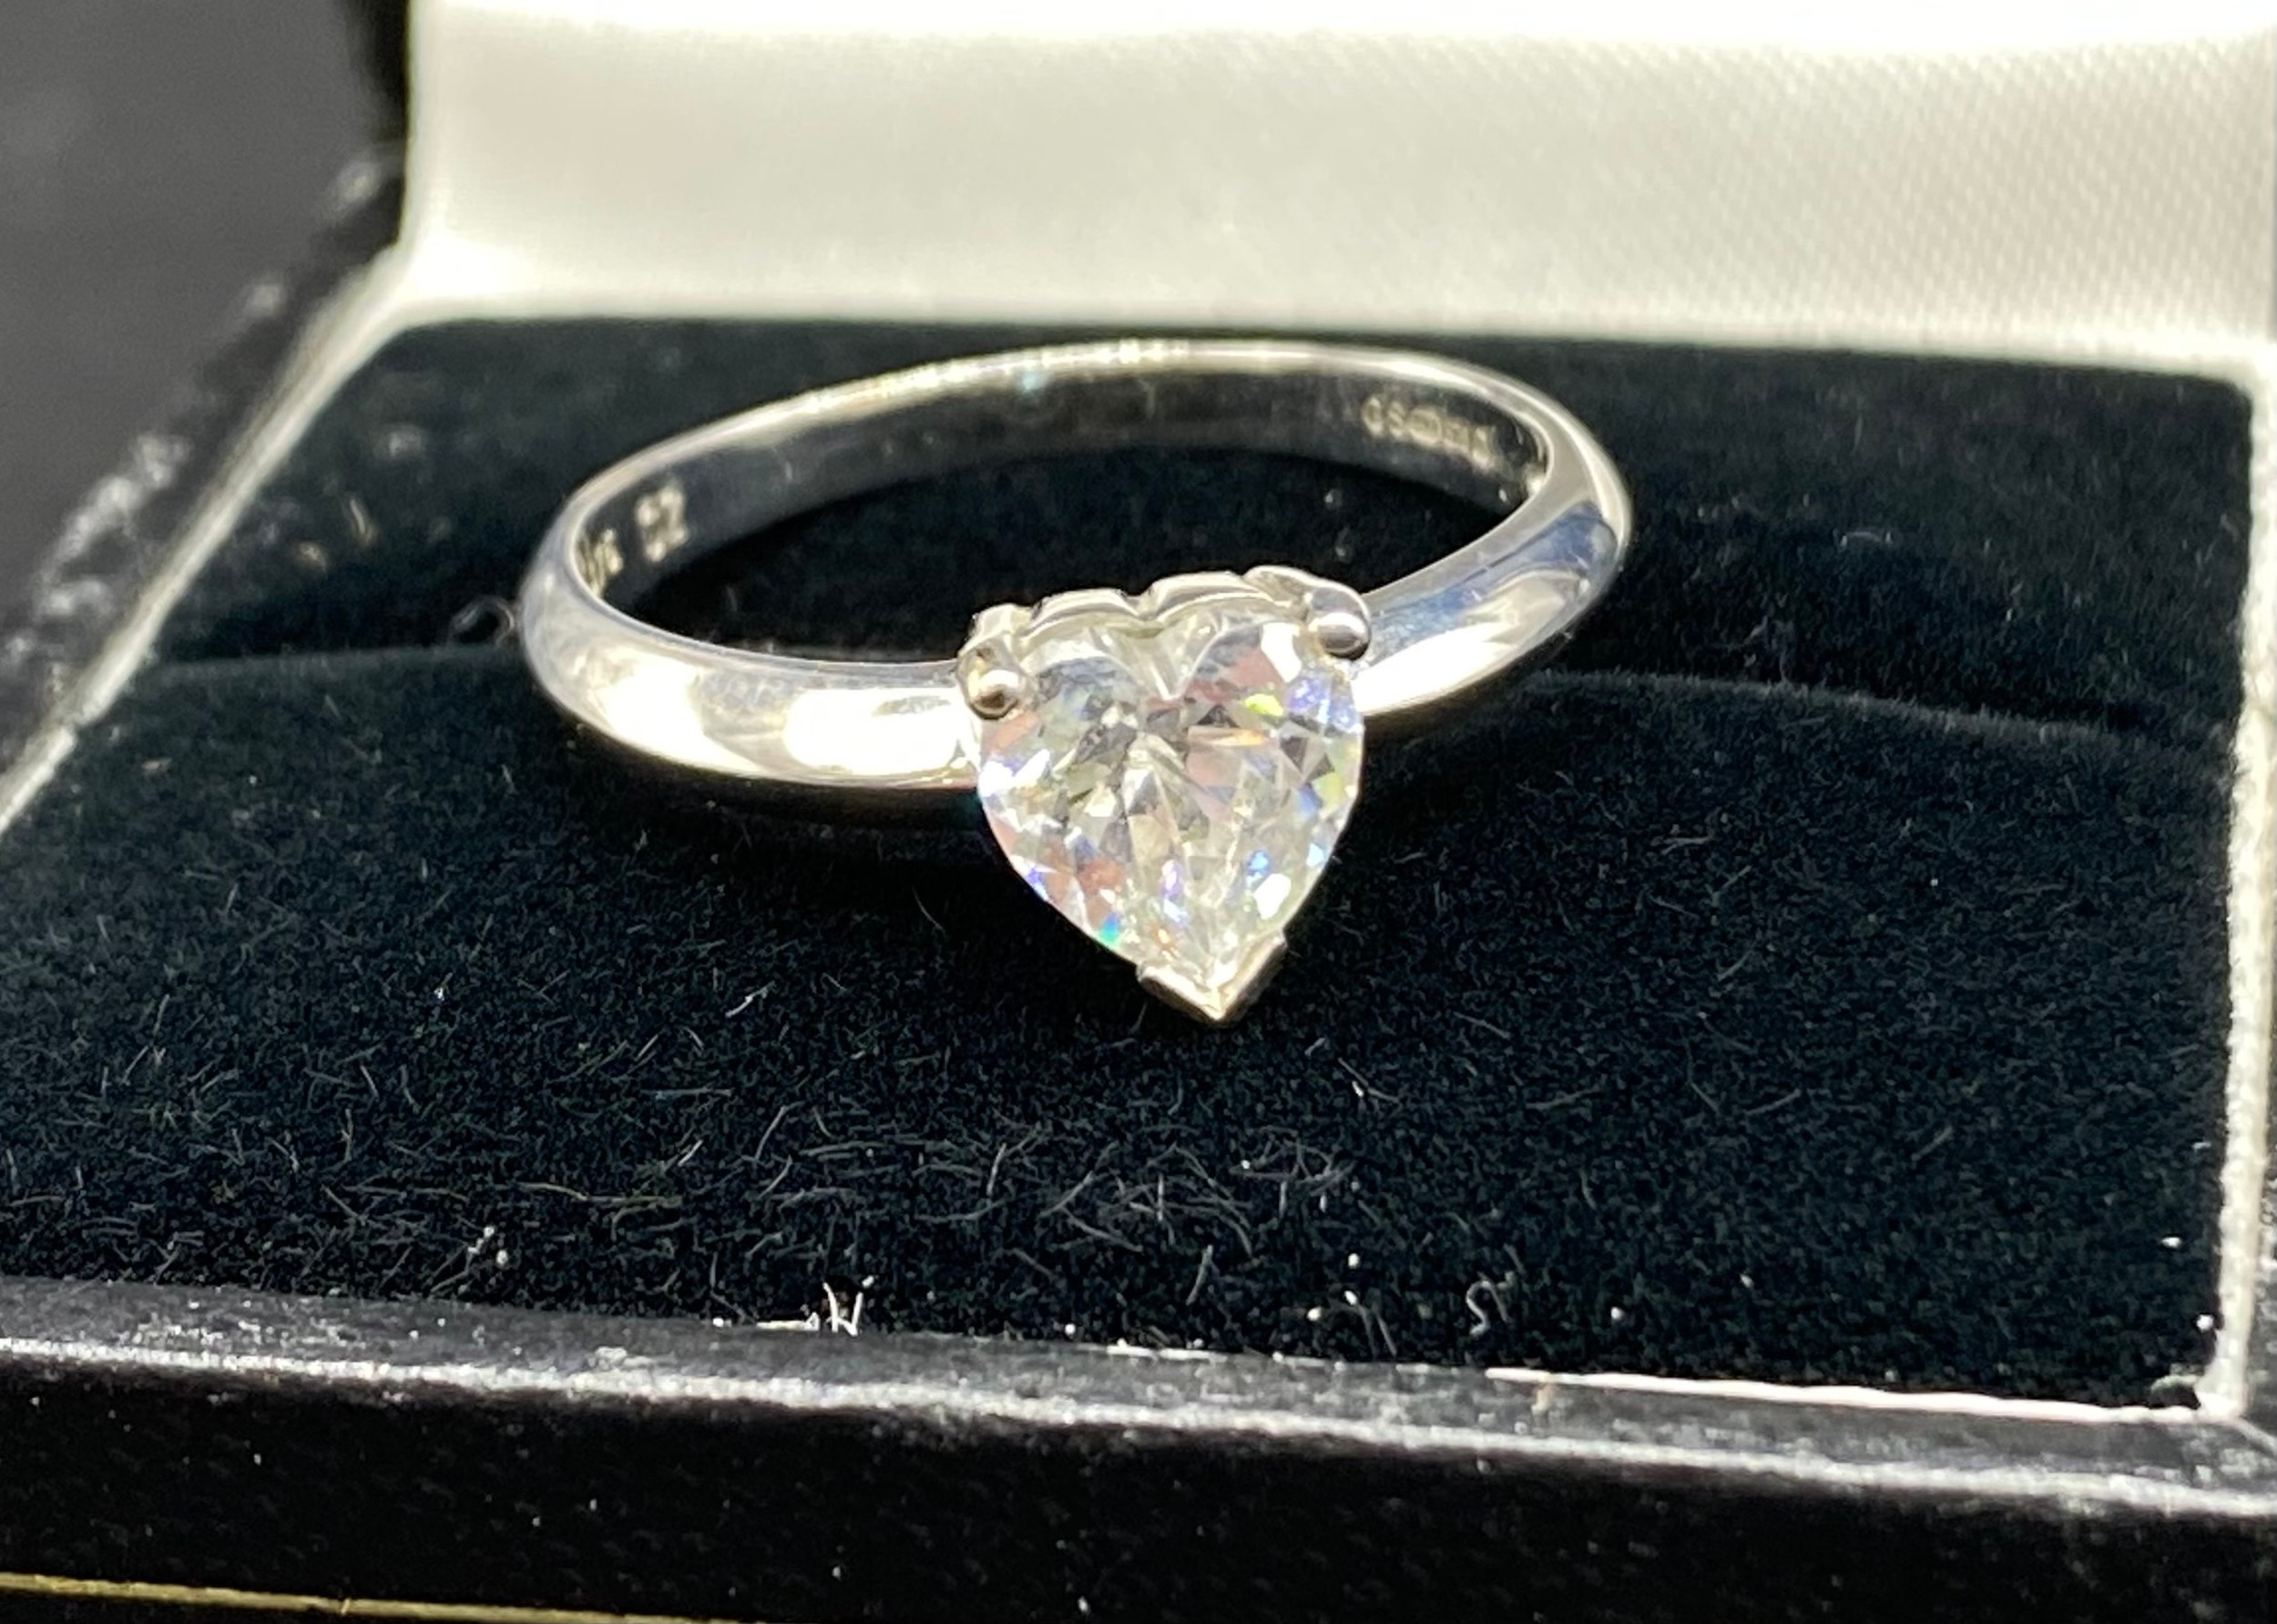 9ct white gold 375 hall marked cubic zirconia set ring size [L 1/2] [1.82] grams - Image 2 of 3